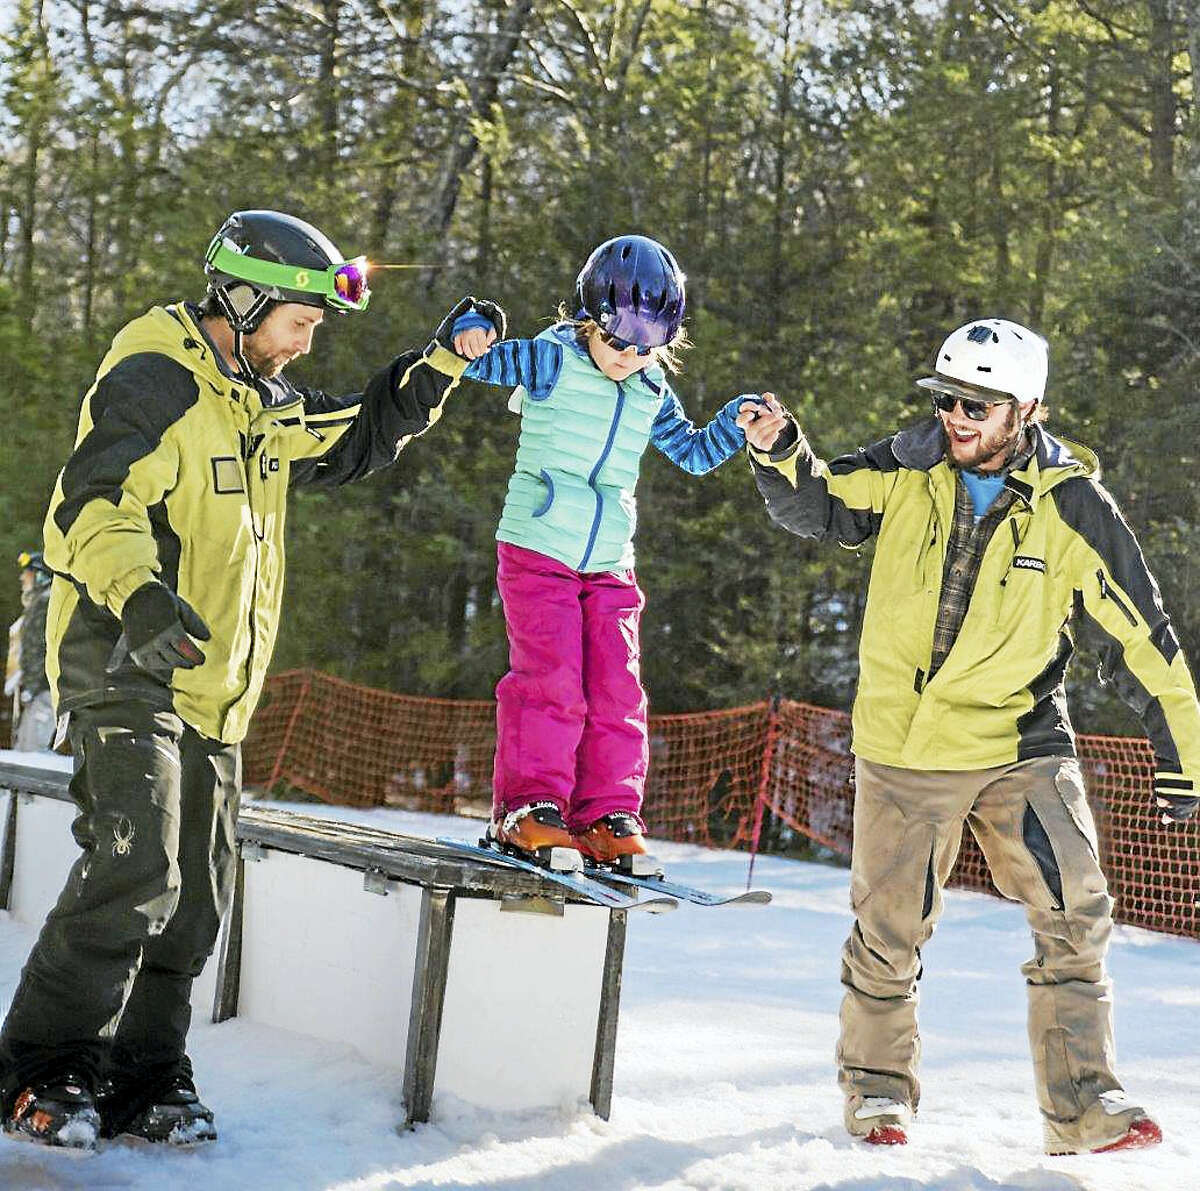 Ski Sundown/Taylor Kemp PhotographyA child participates in Ski Sundown's Girls Rock the Park event in 2015. Skiing event registration is open this weekend in Salisbury.